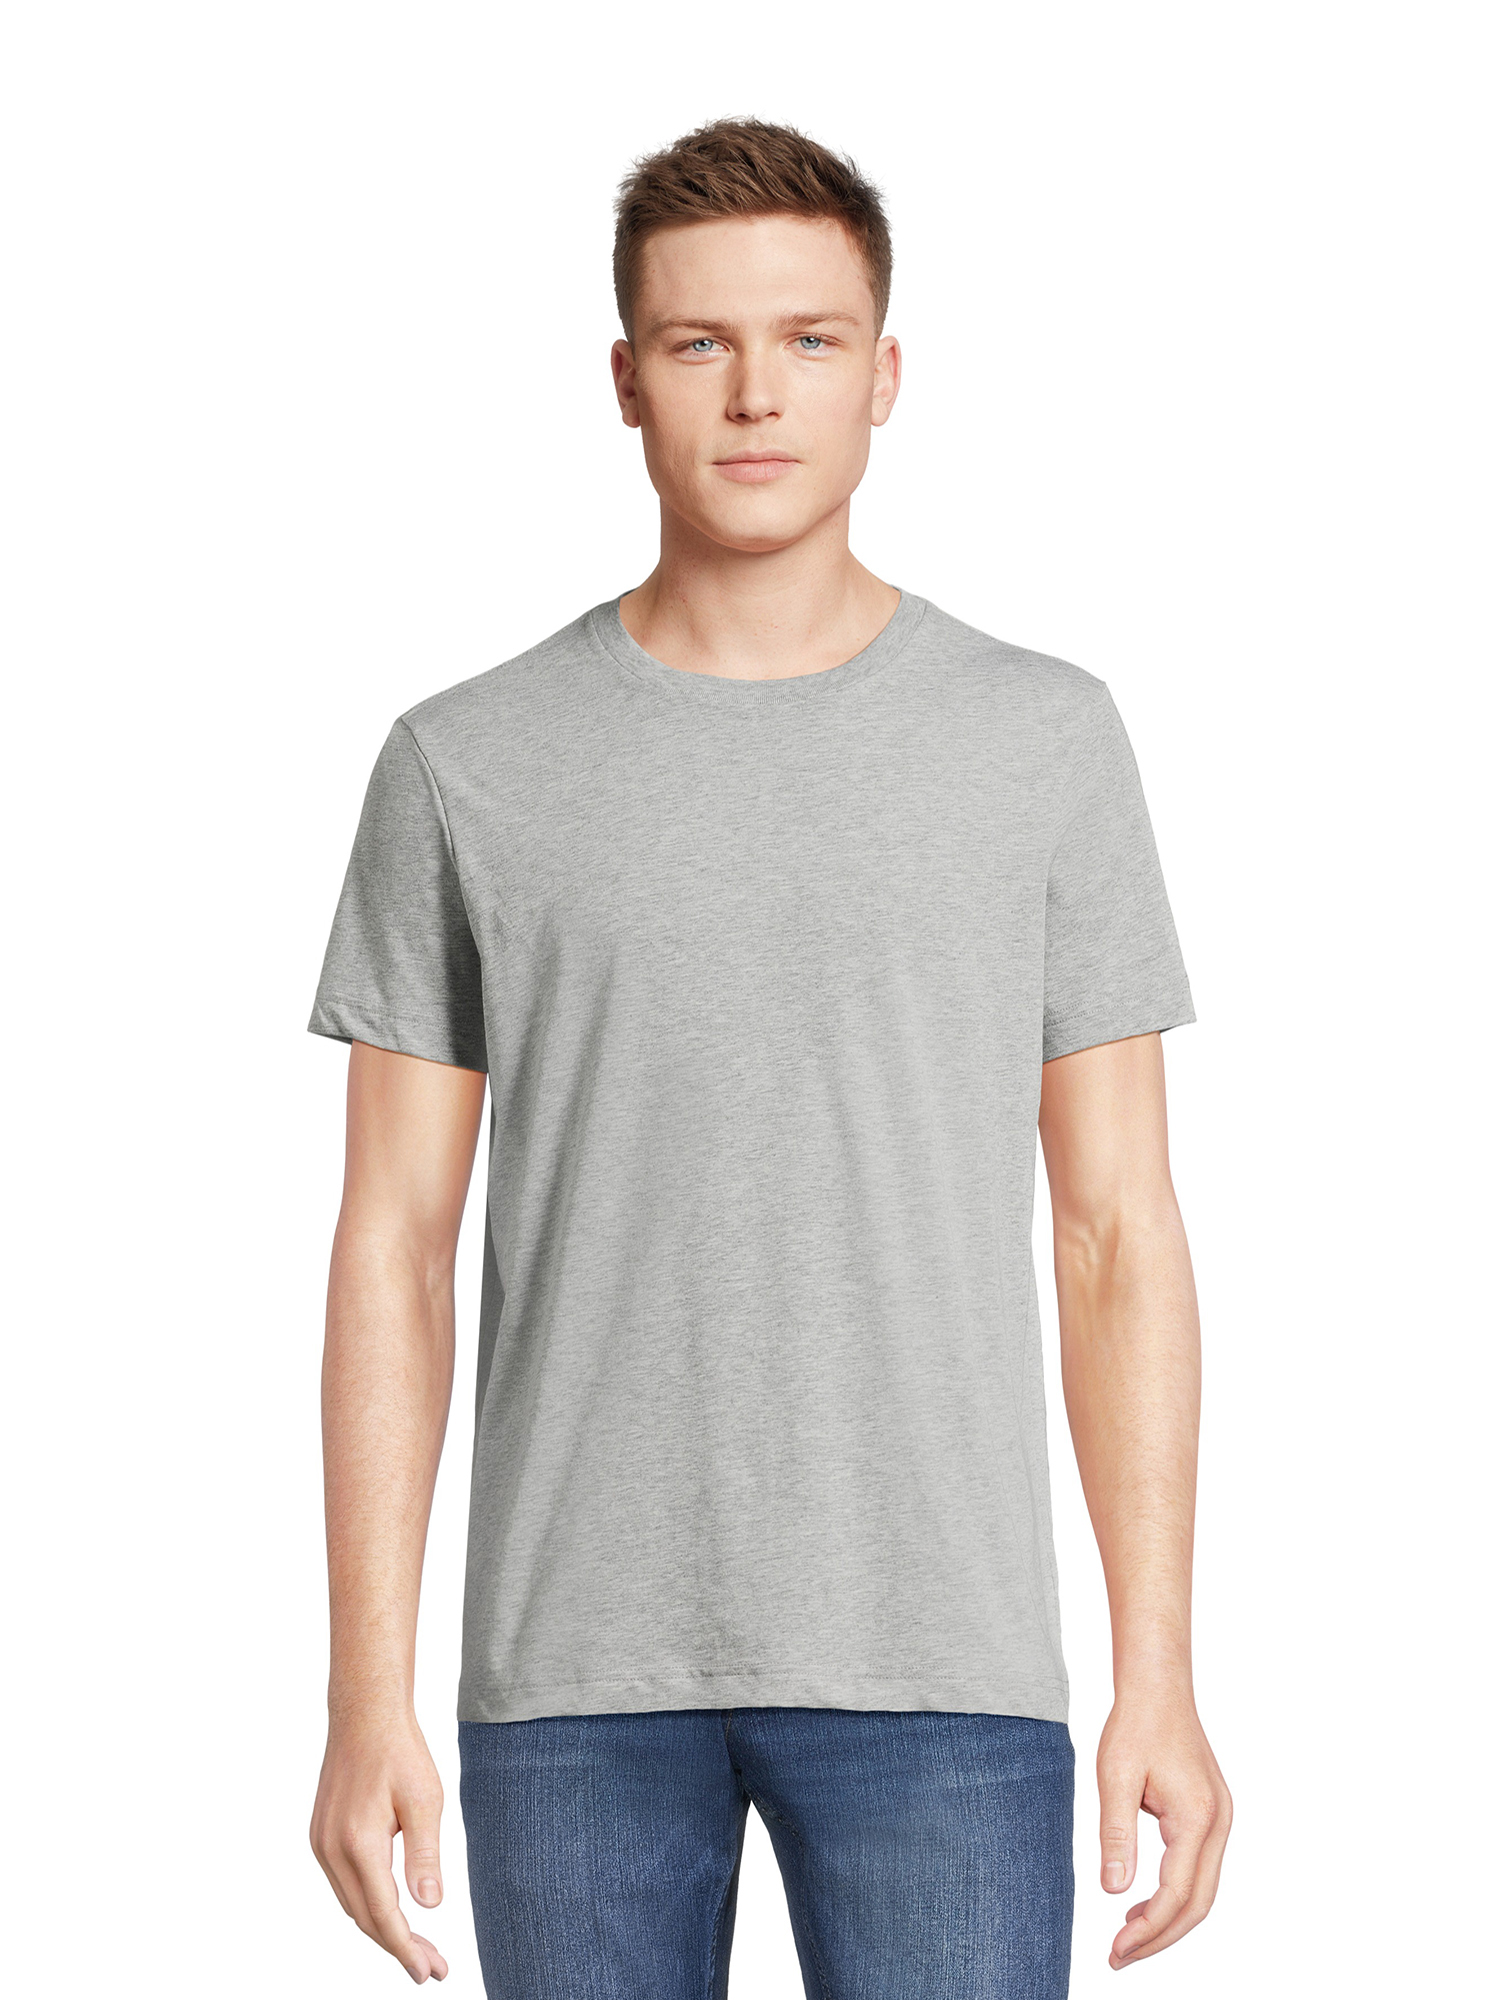 George Men's & Big Men's Crewneck Tee with Short Sleeves, Sizes XS-3XL - image 1 of 5